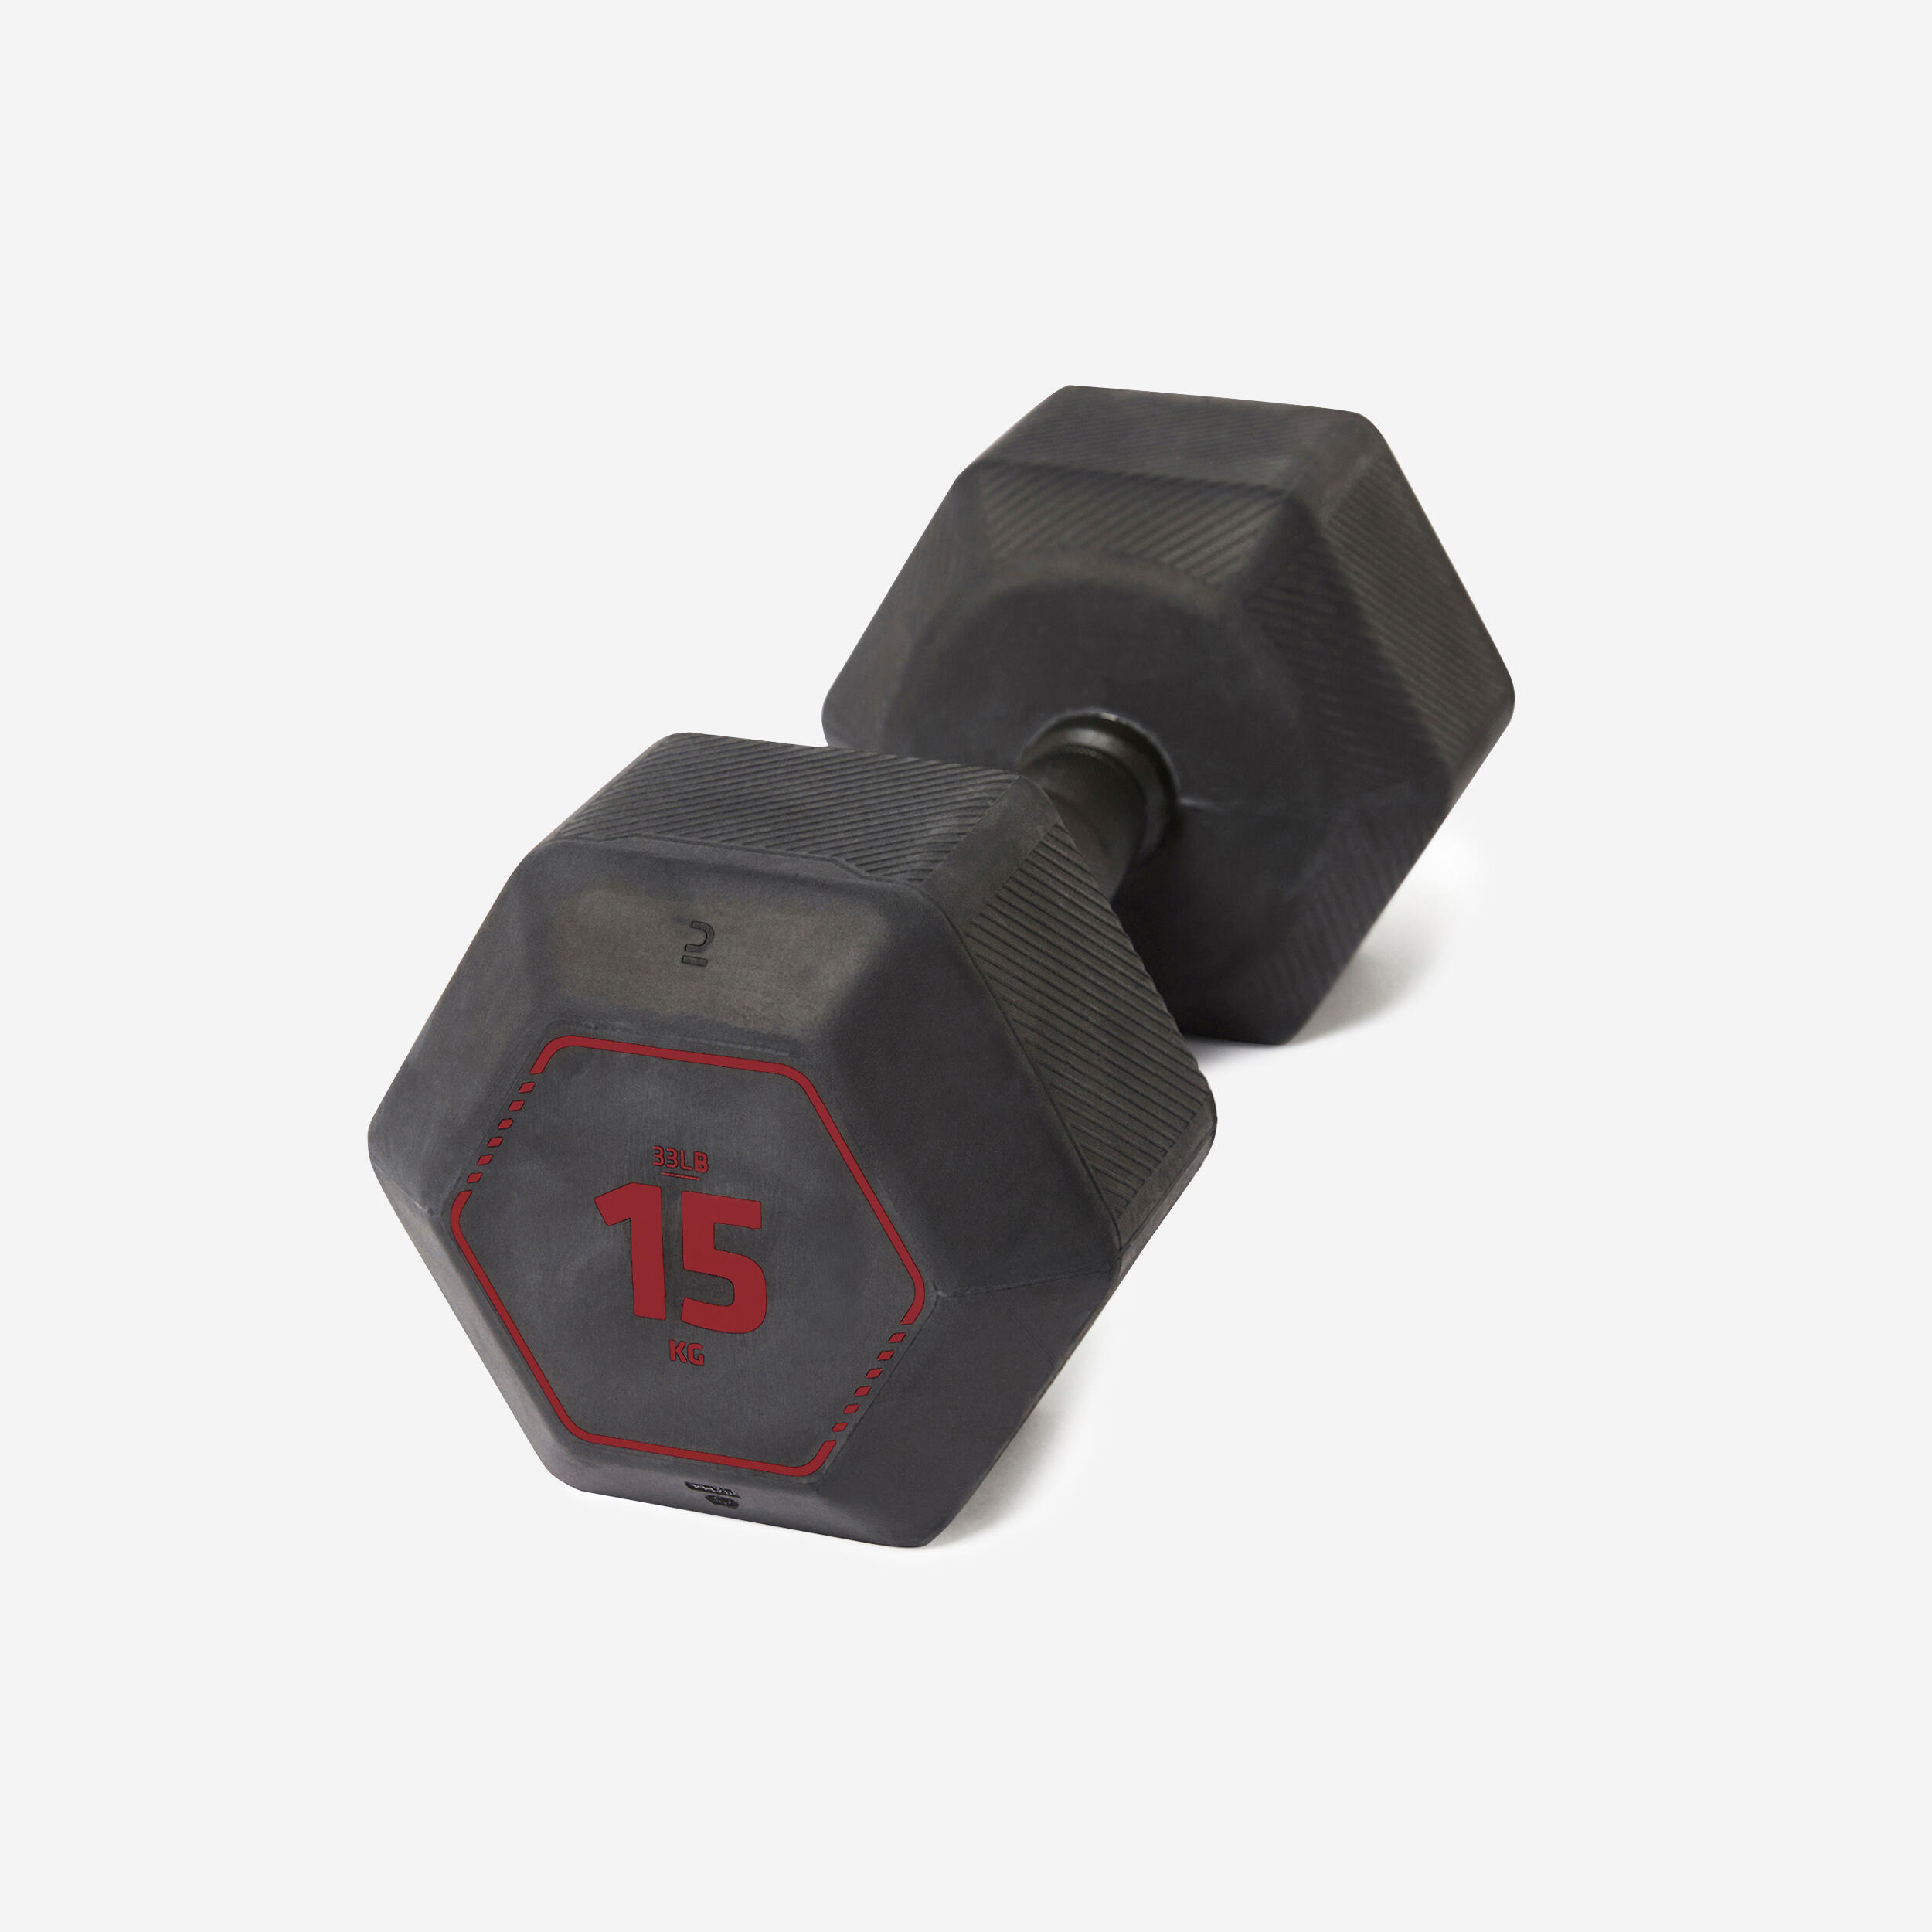 CORENGTH Cross Training and Weight Training Hex Dumbbells 15 kg - Black